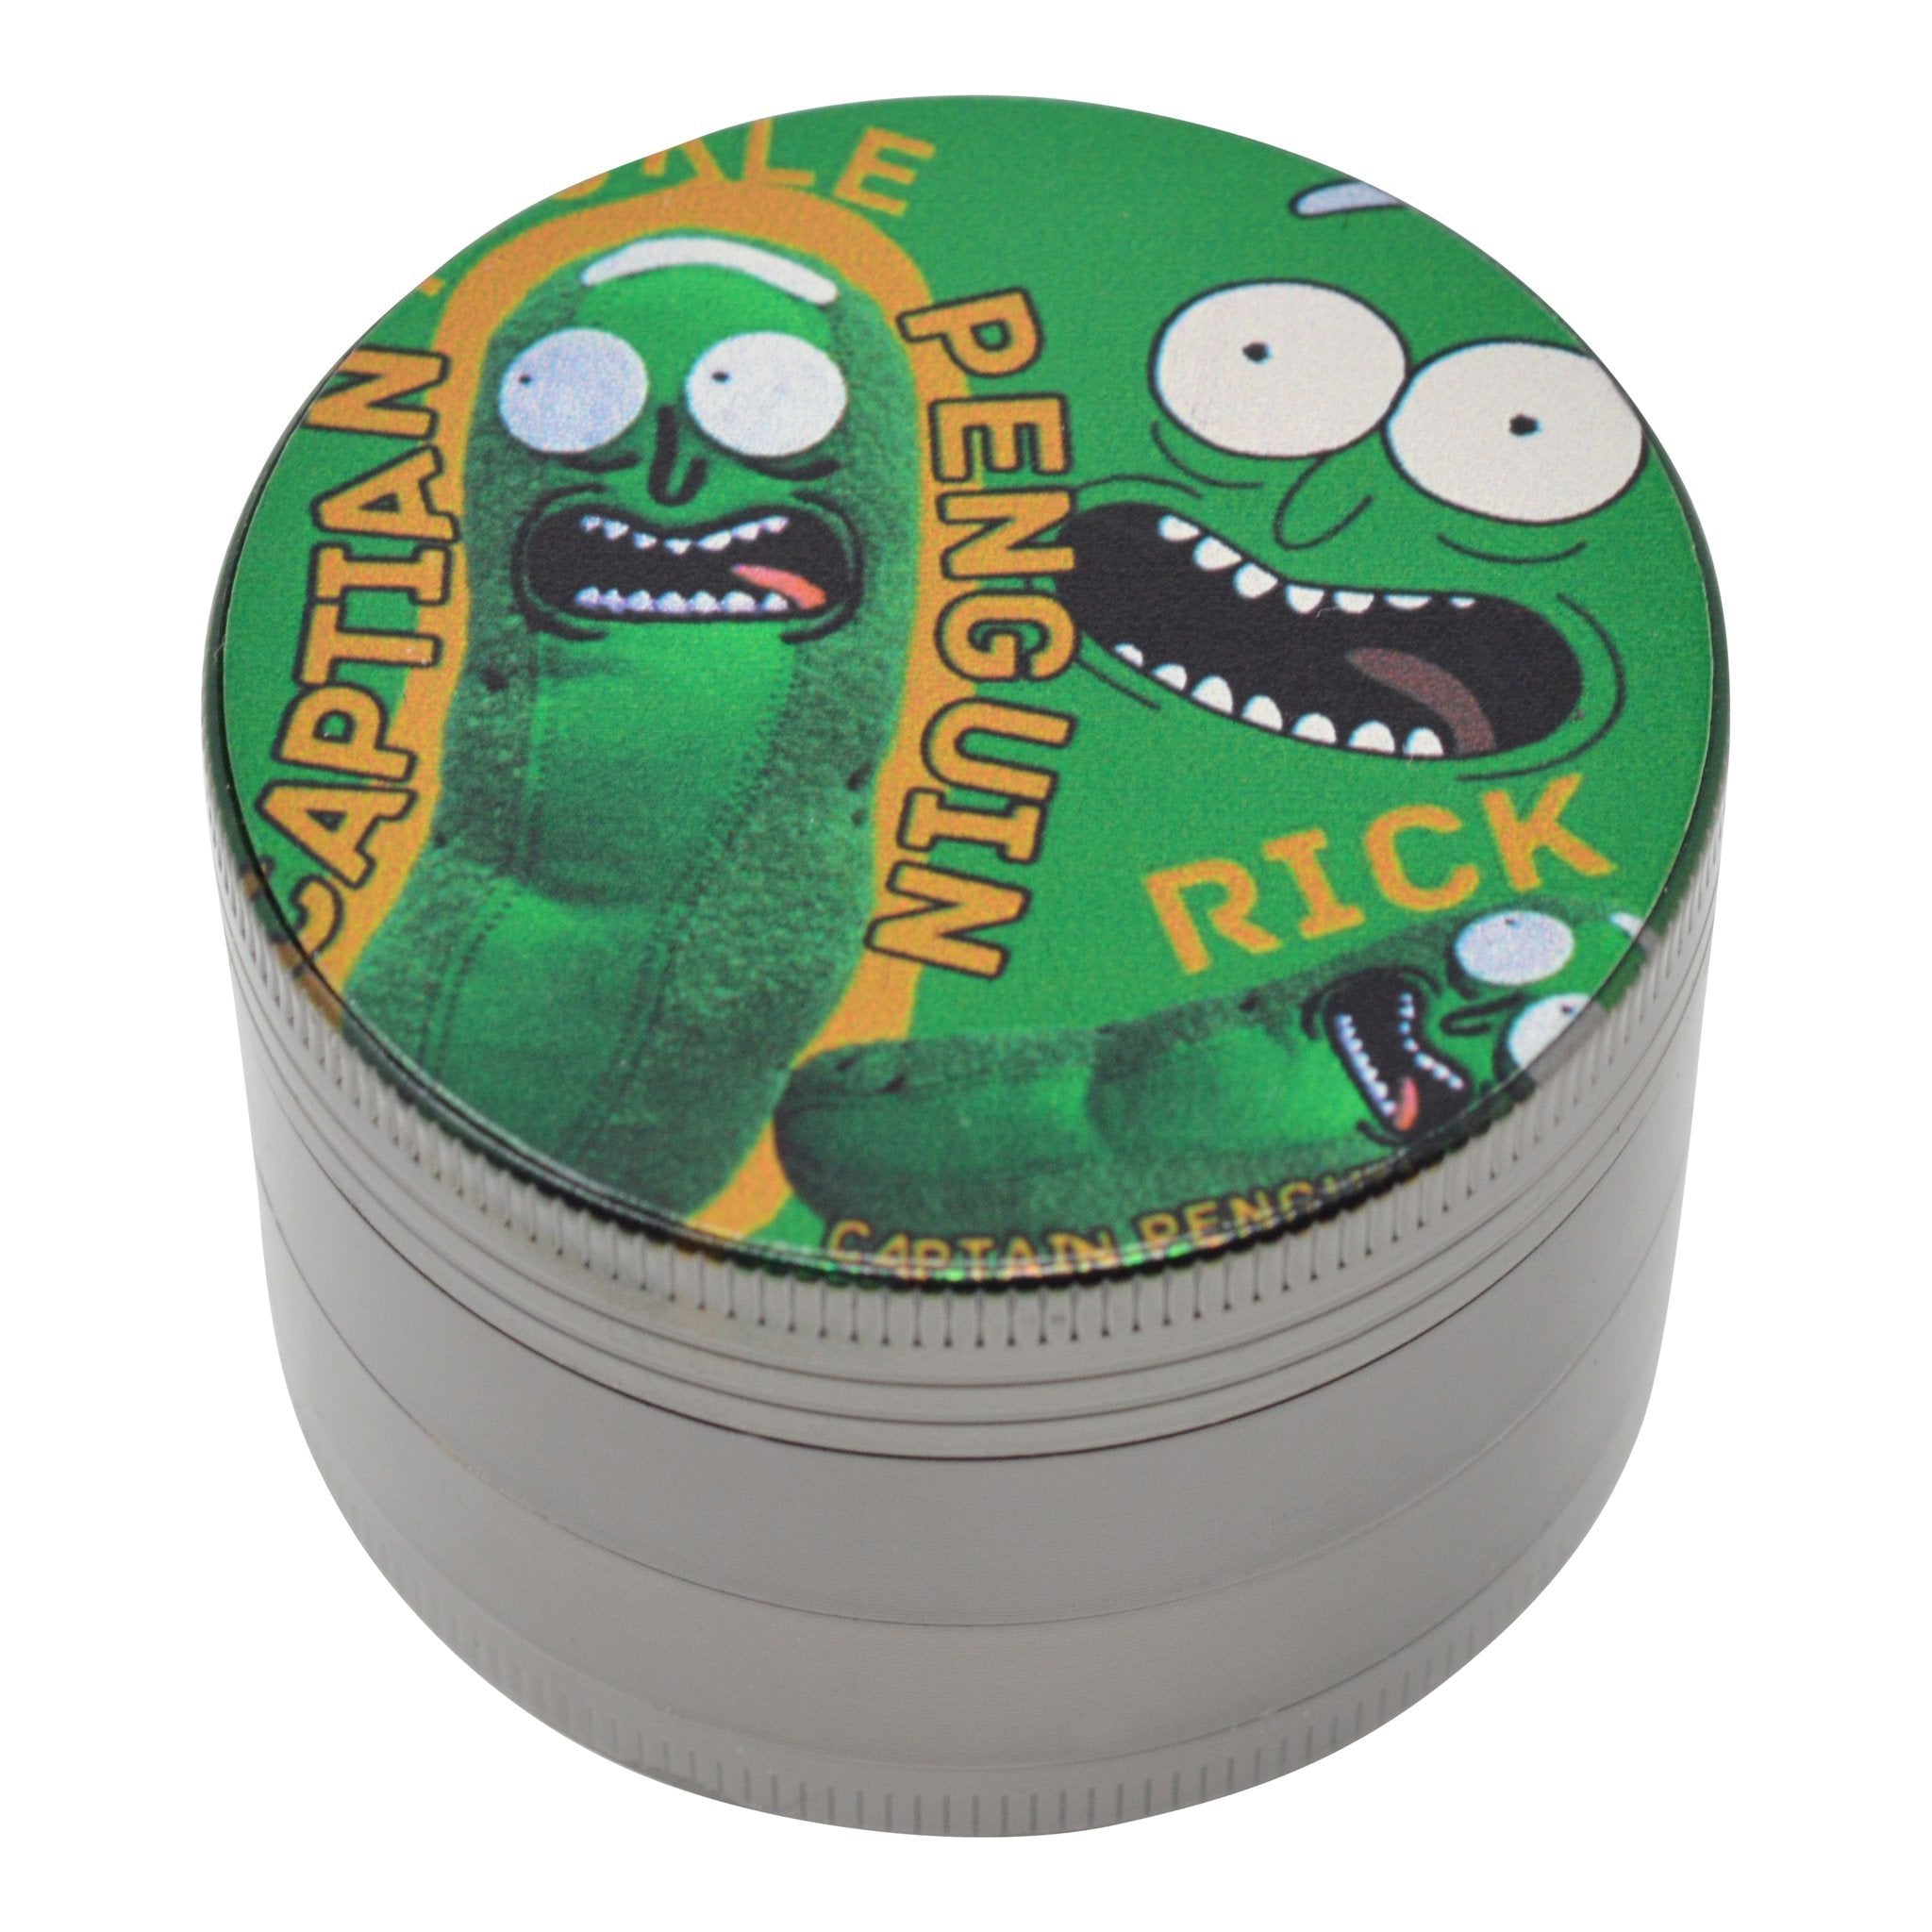 High angle shot of closed grinder with RnM wacky cucumber with face design Captain Penguin word green yellow colors